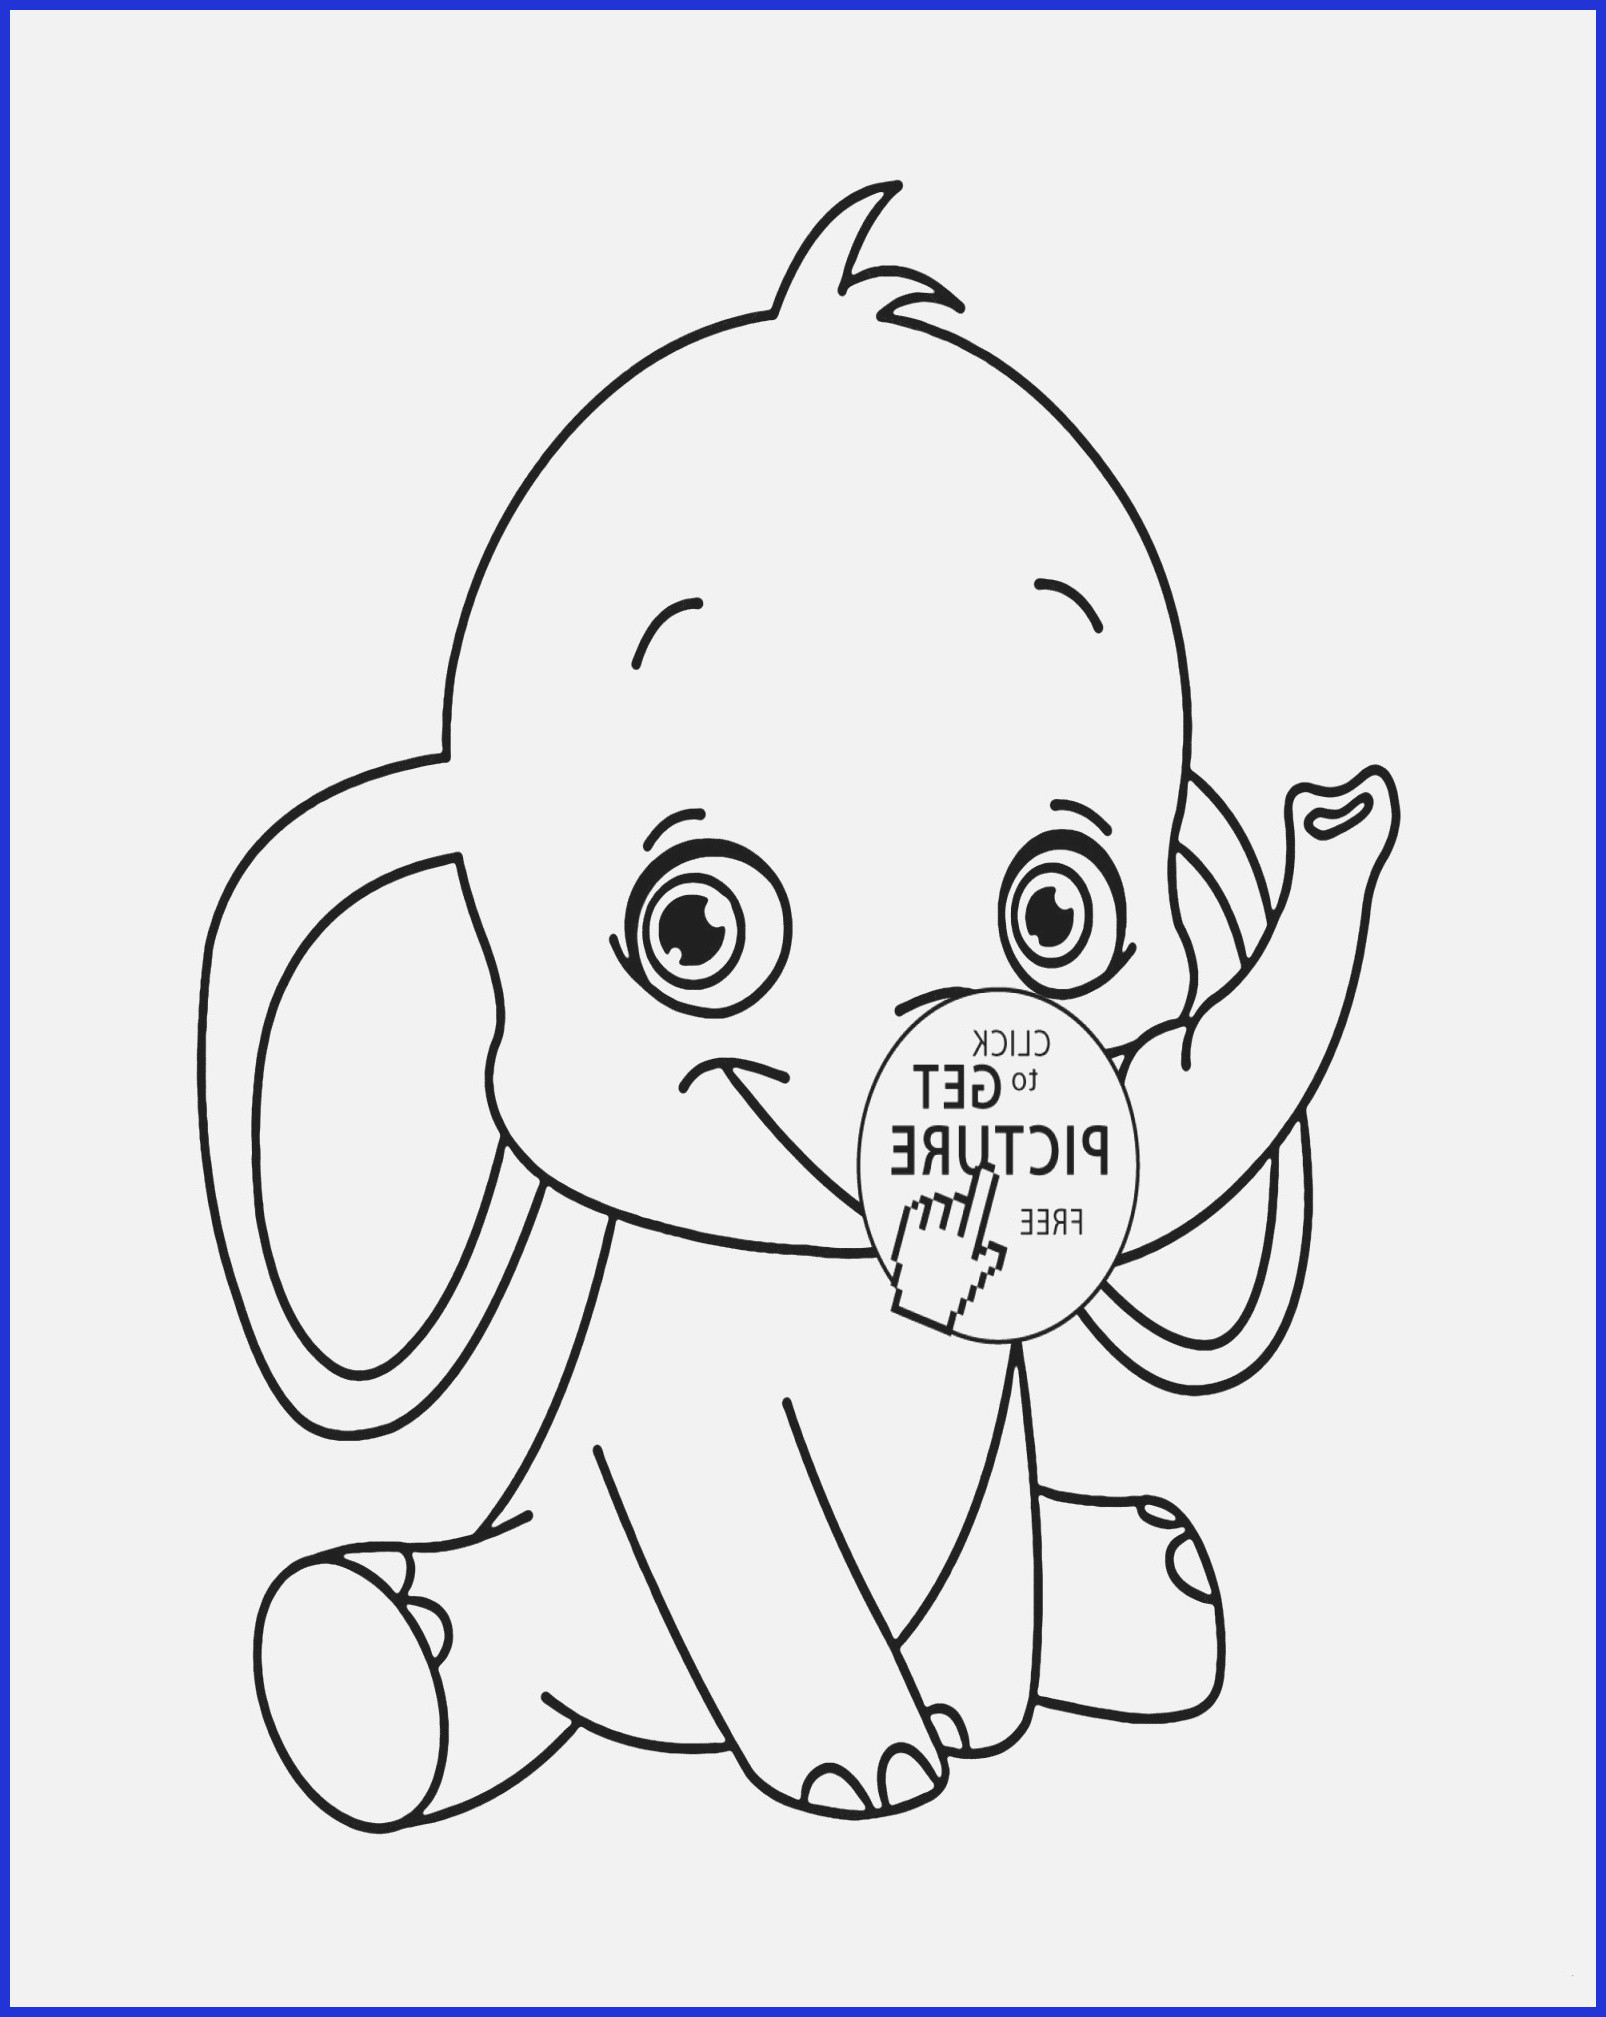 coloring page of animals for adults elegant images 16 inspirational coloring pages cute animals of coloring page of animals for adults